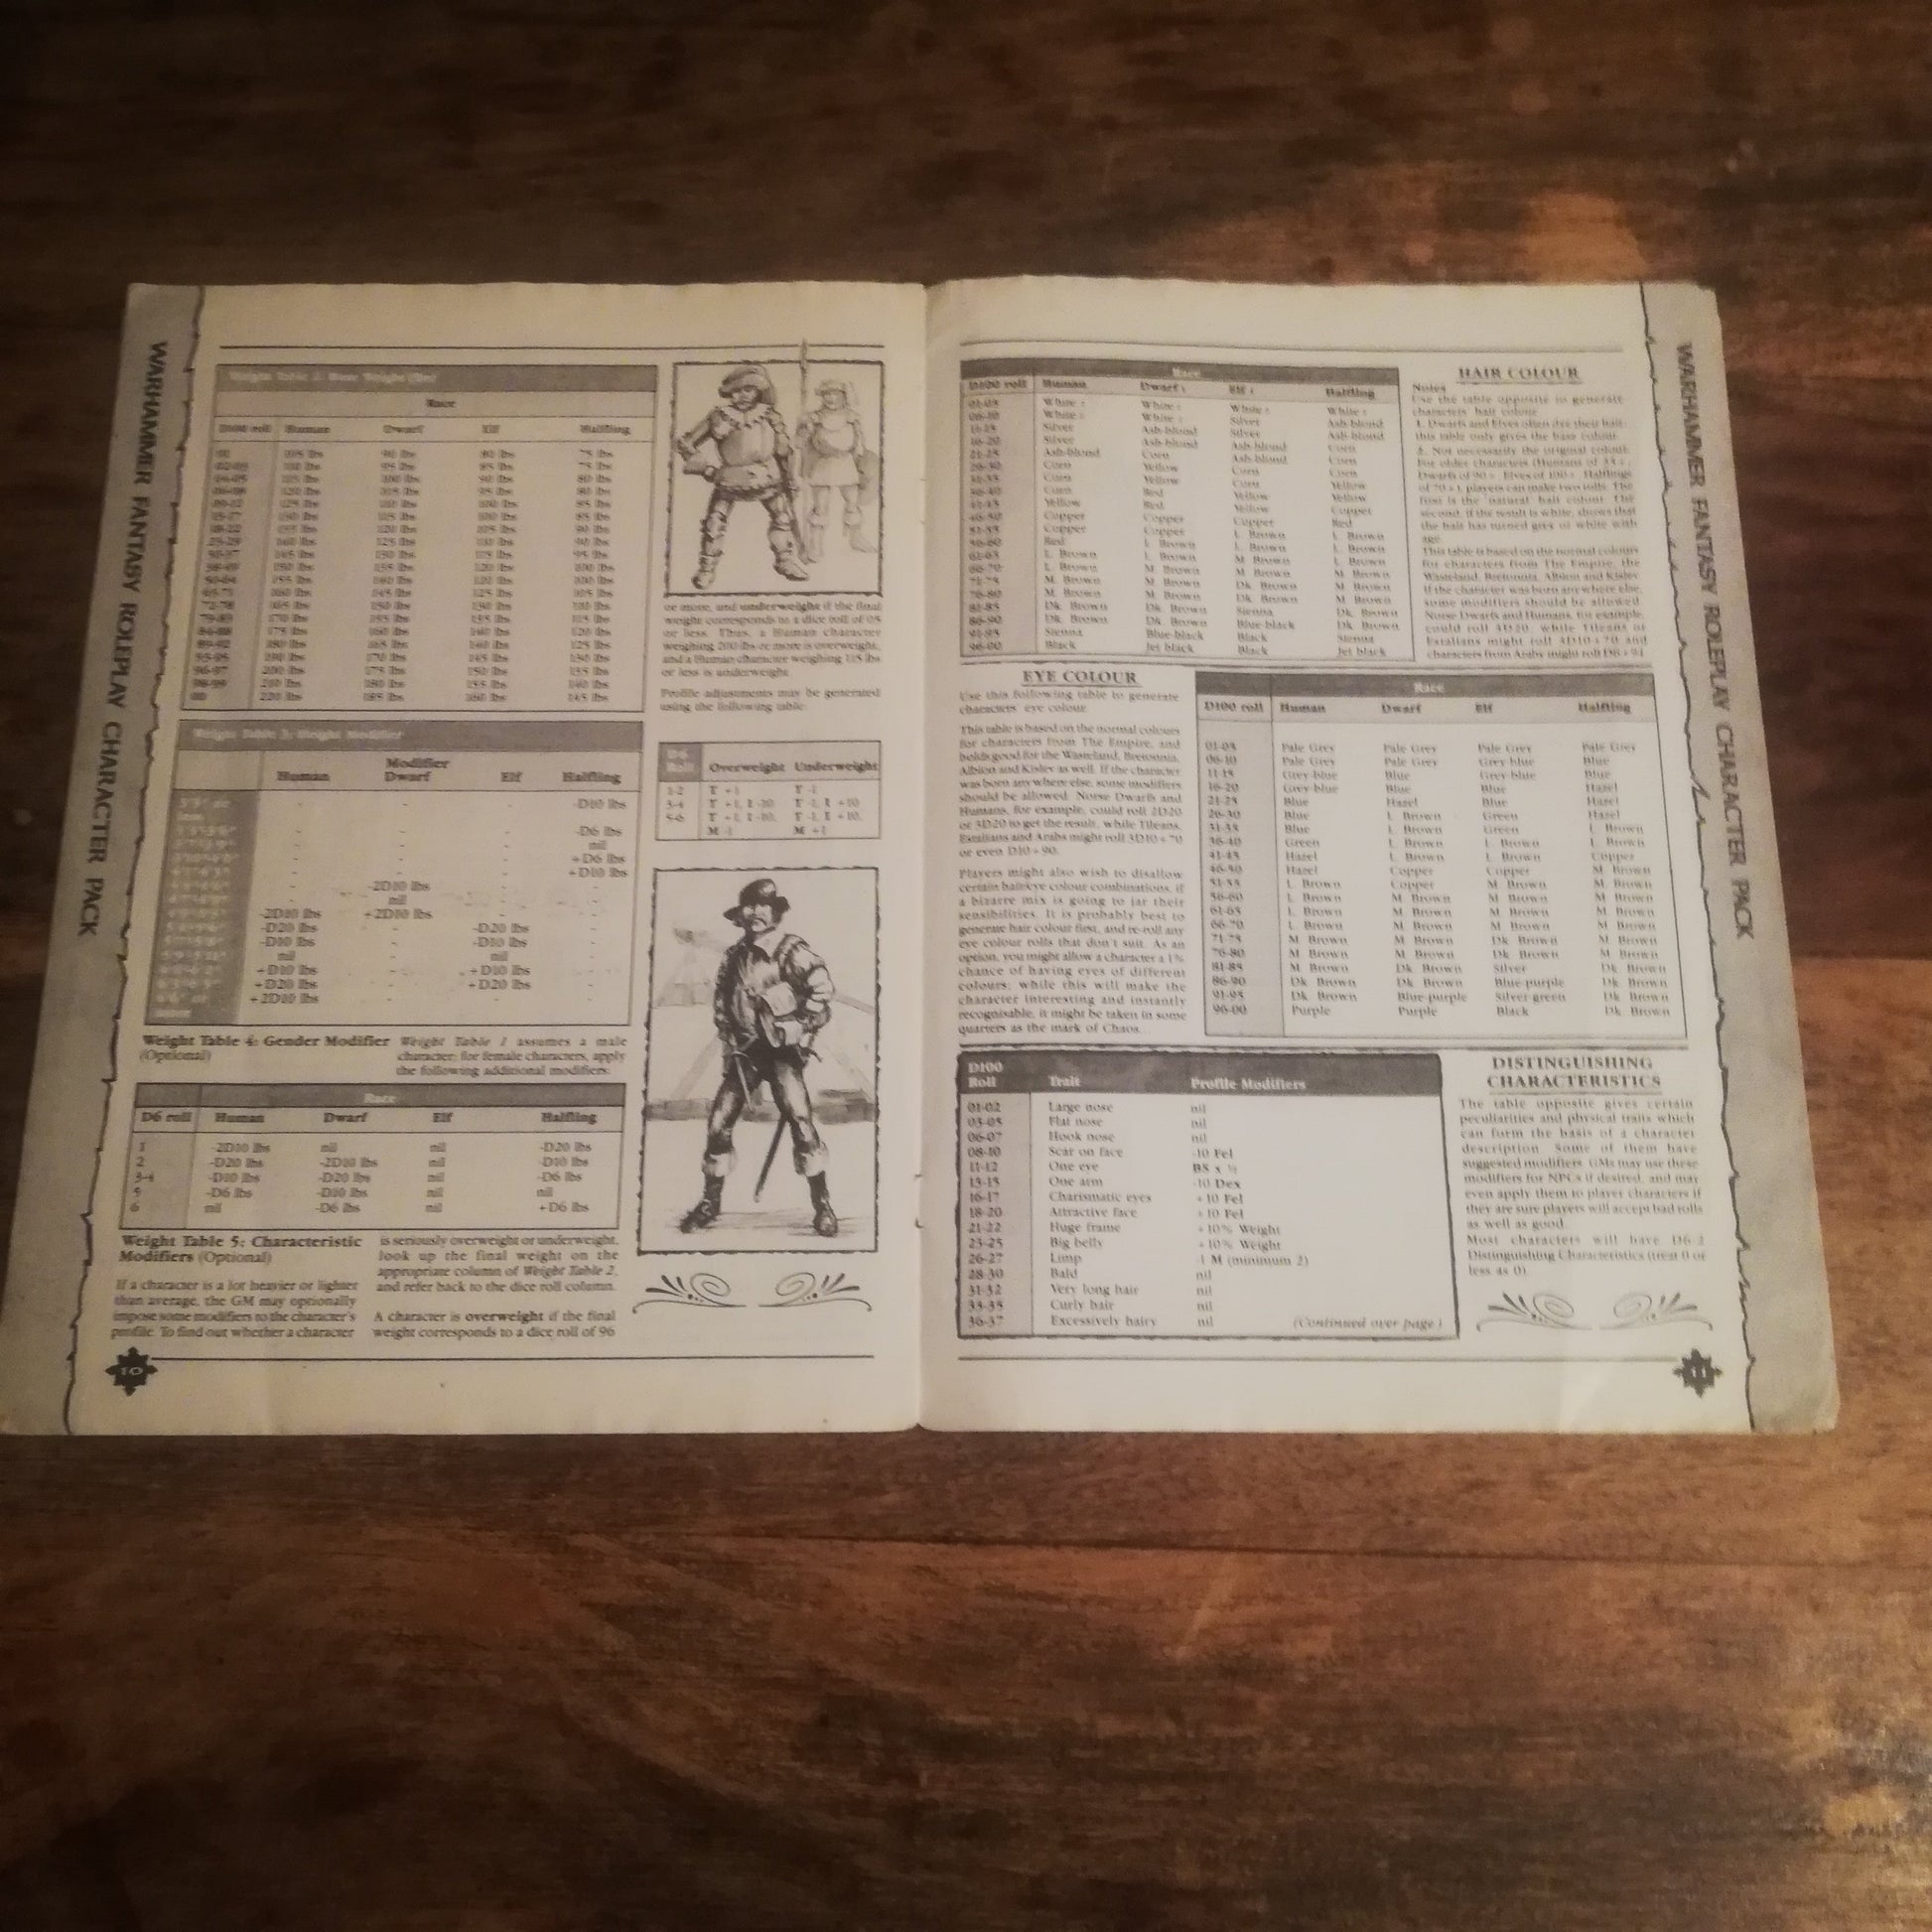 WFRP CHARACTER PACK 1992 EDITION WARHAMMER FANTASY ROLEPLAY - AllRoleplaying.com